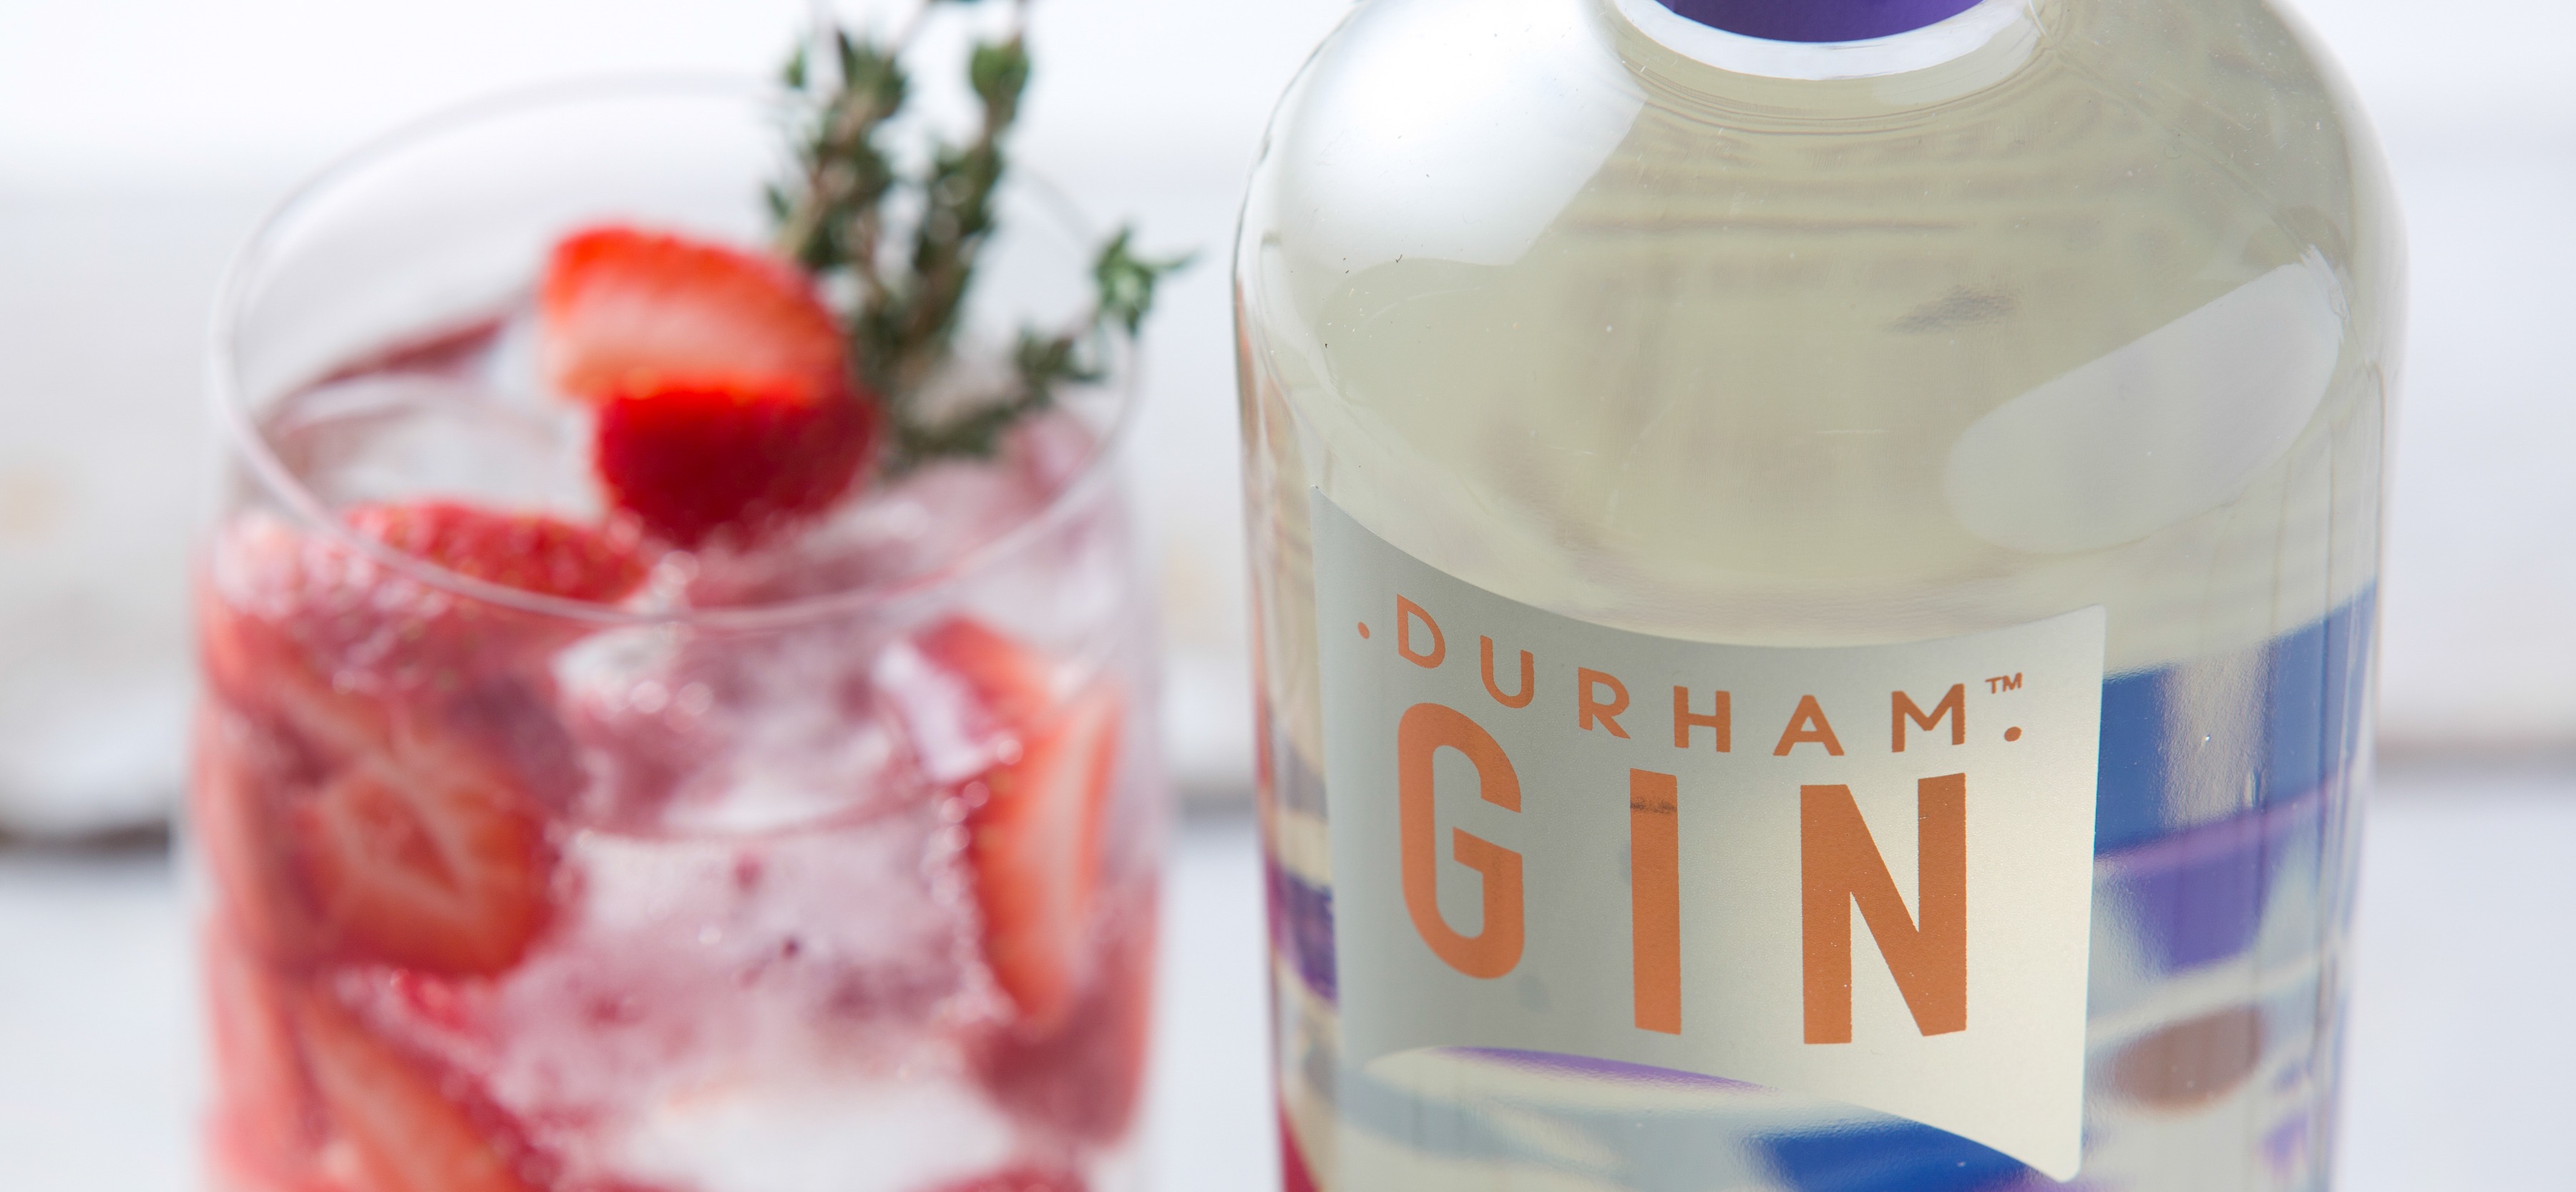 Finance Durham Fund completes its first deal investing in Durham Gin